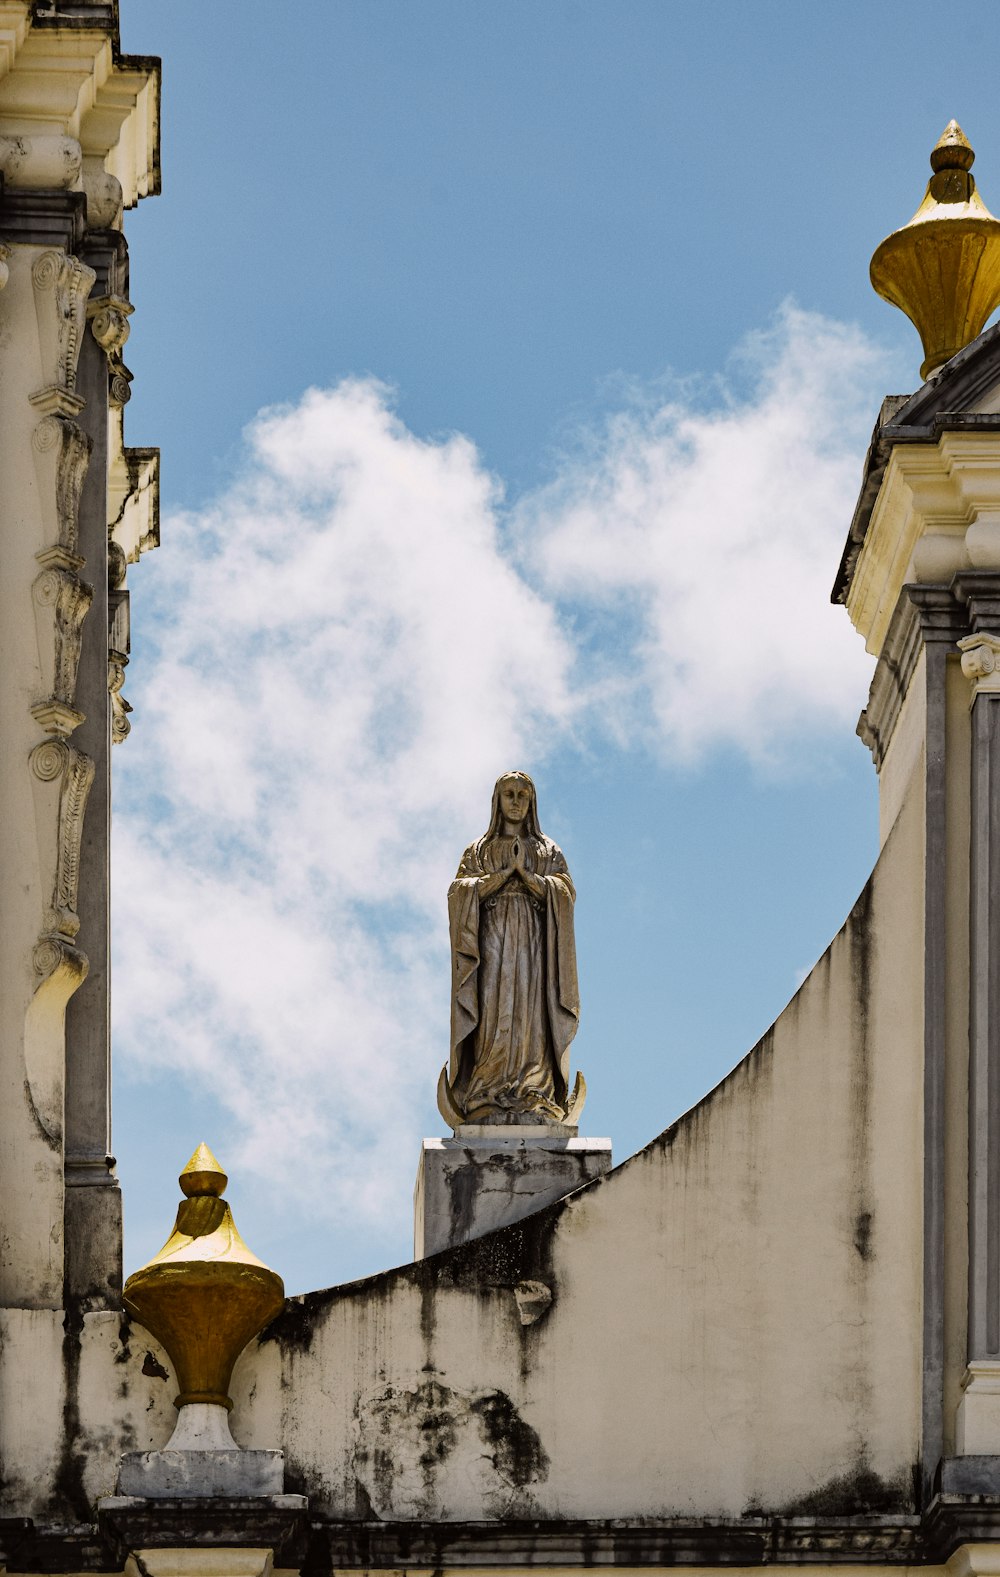 a statue of a person on top of a building